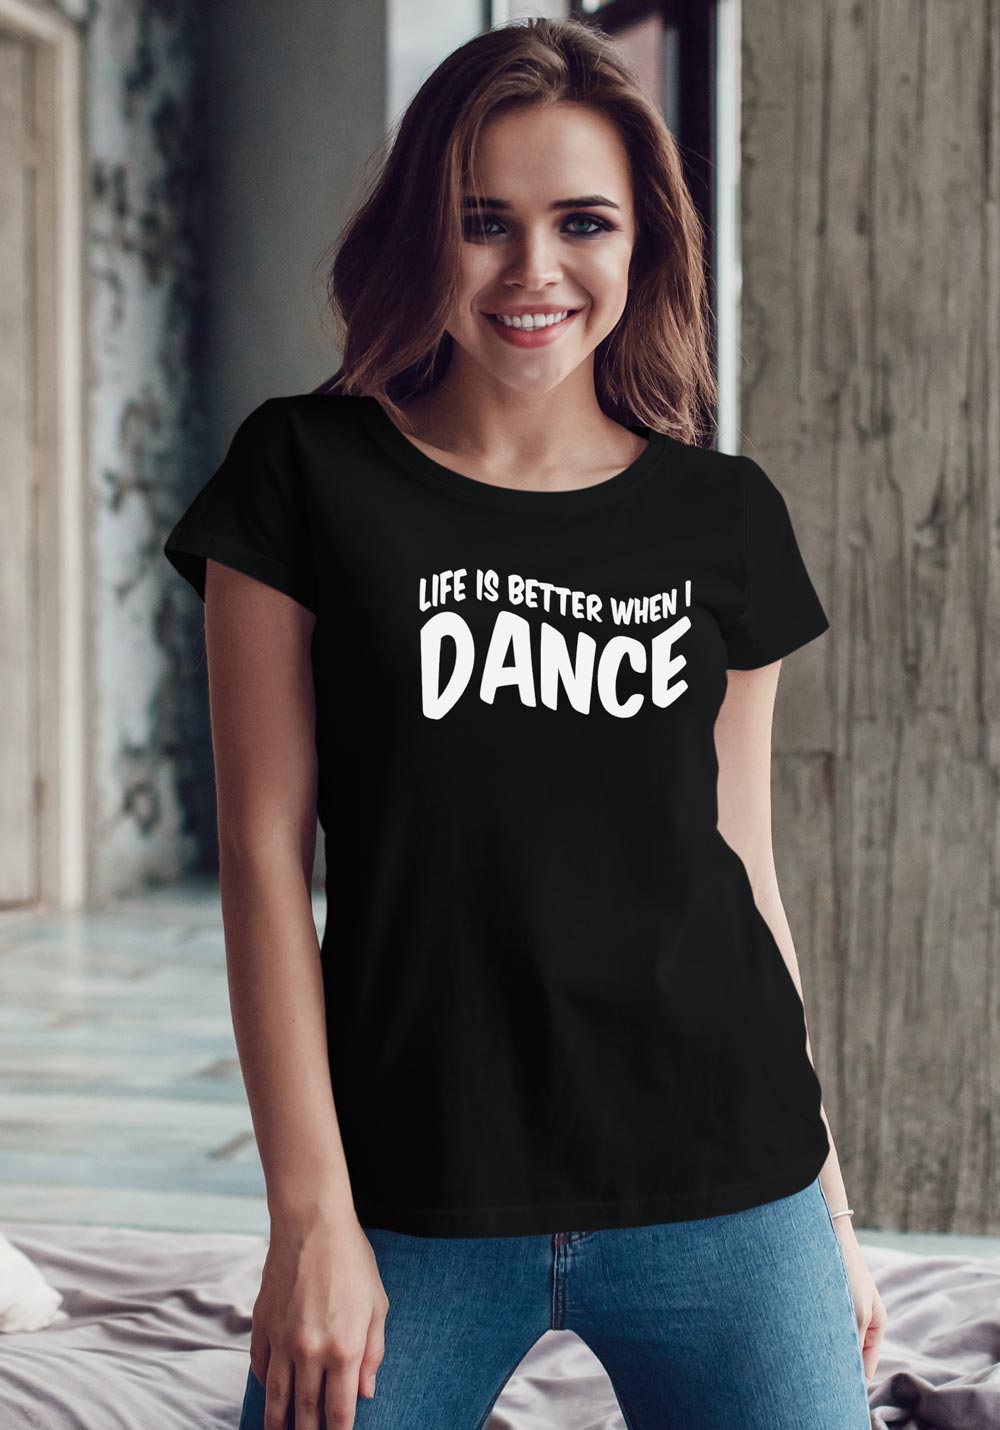 Woman wearing Zouk T-shirt decorated with unique “Life is better when I Dance” design in black crew neck style